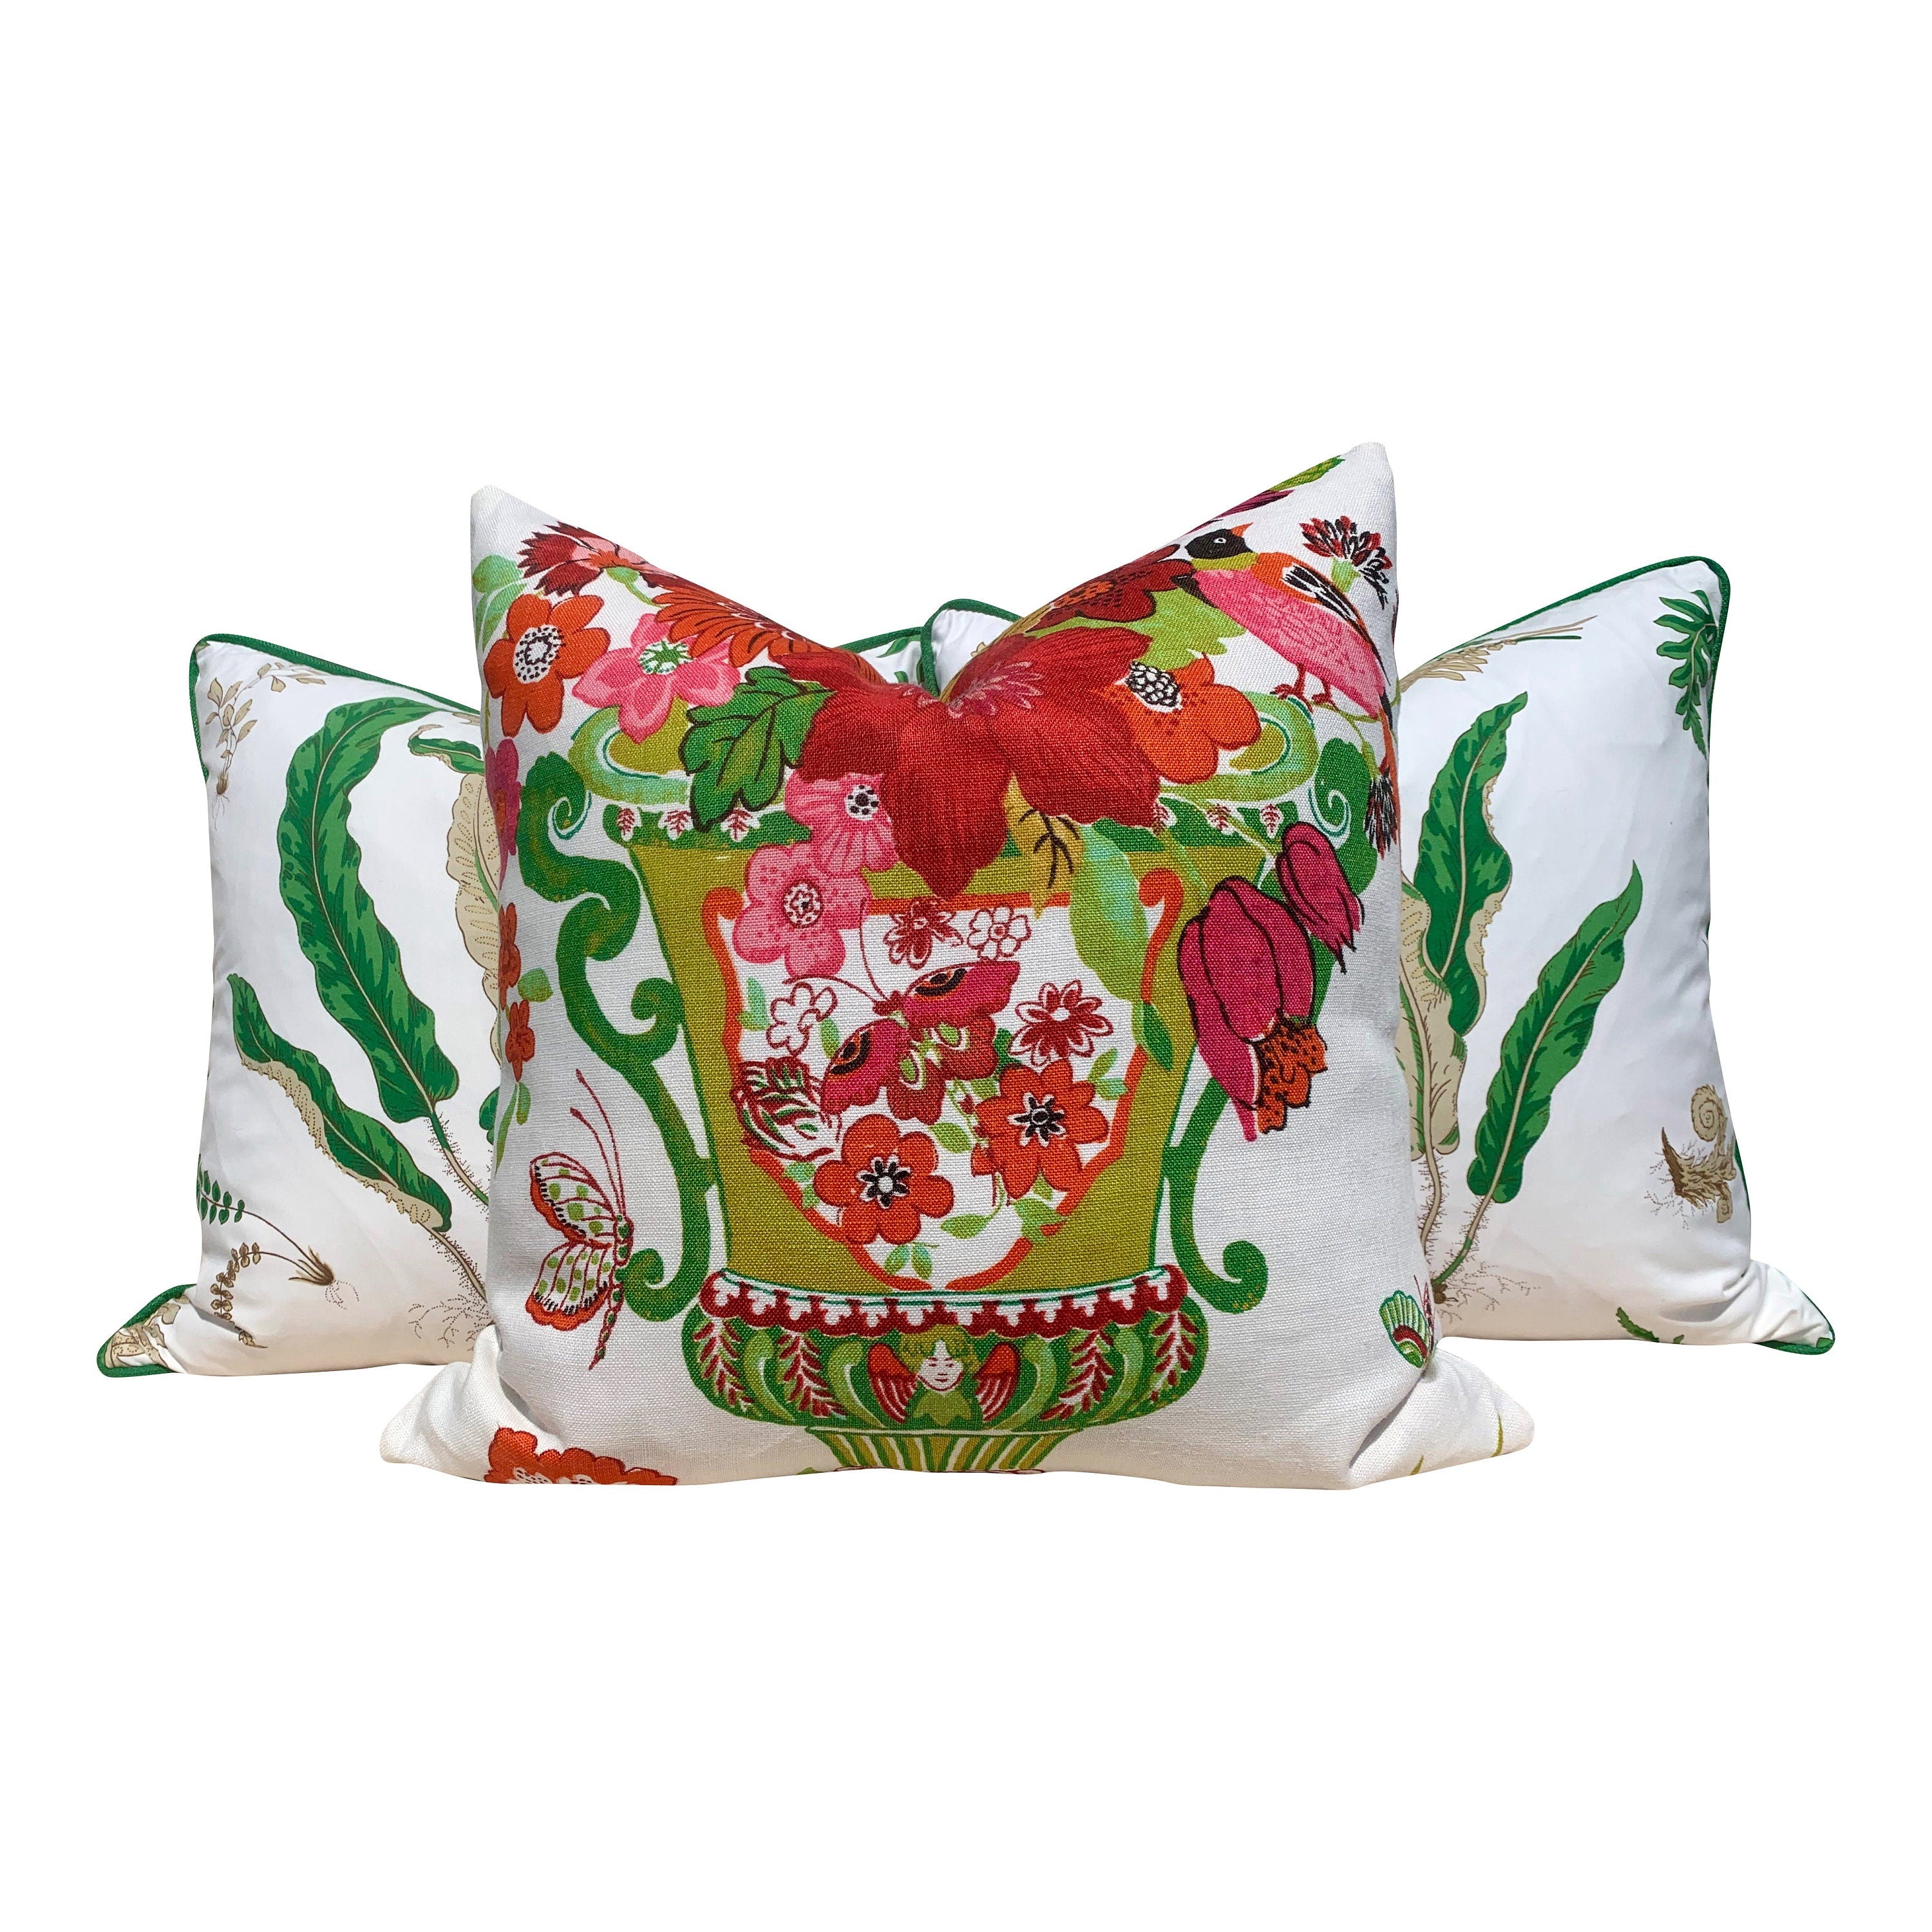 Lansdale Bouquet Pillow Red, Green and Pink. Lumbar Decorative Pillow, Designer pillows, accent cushion cover, high end pillow cover